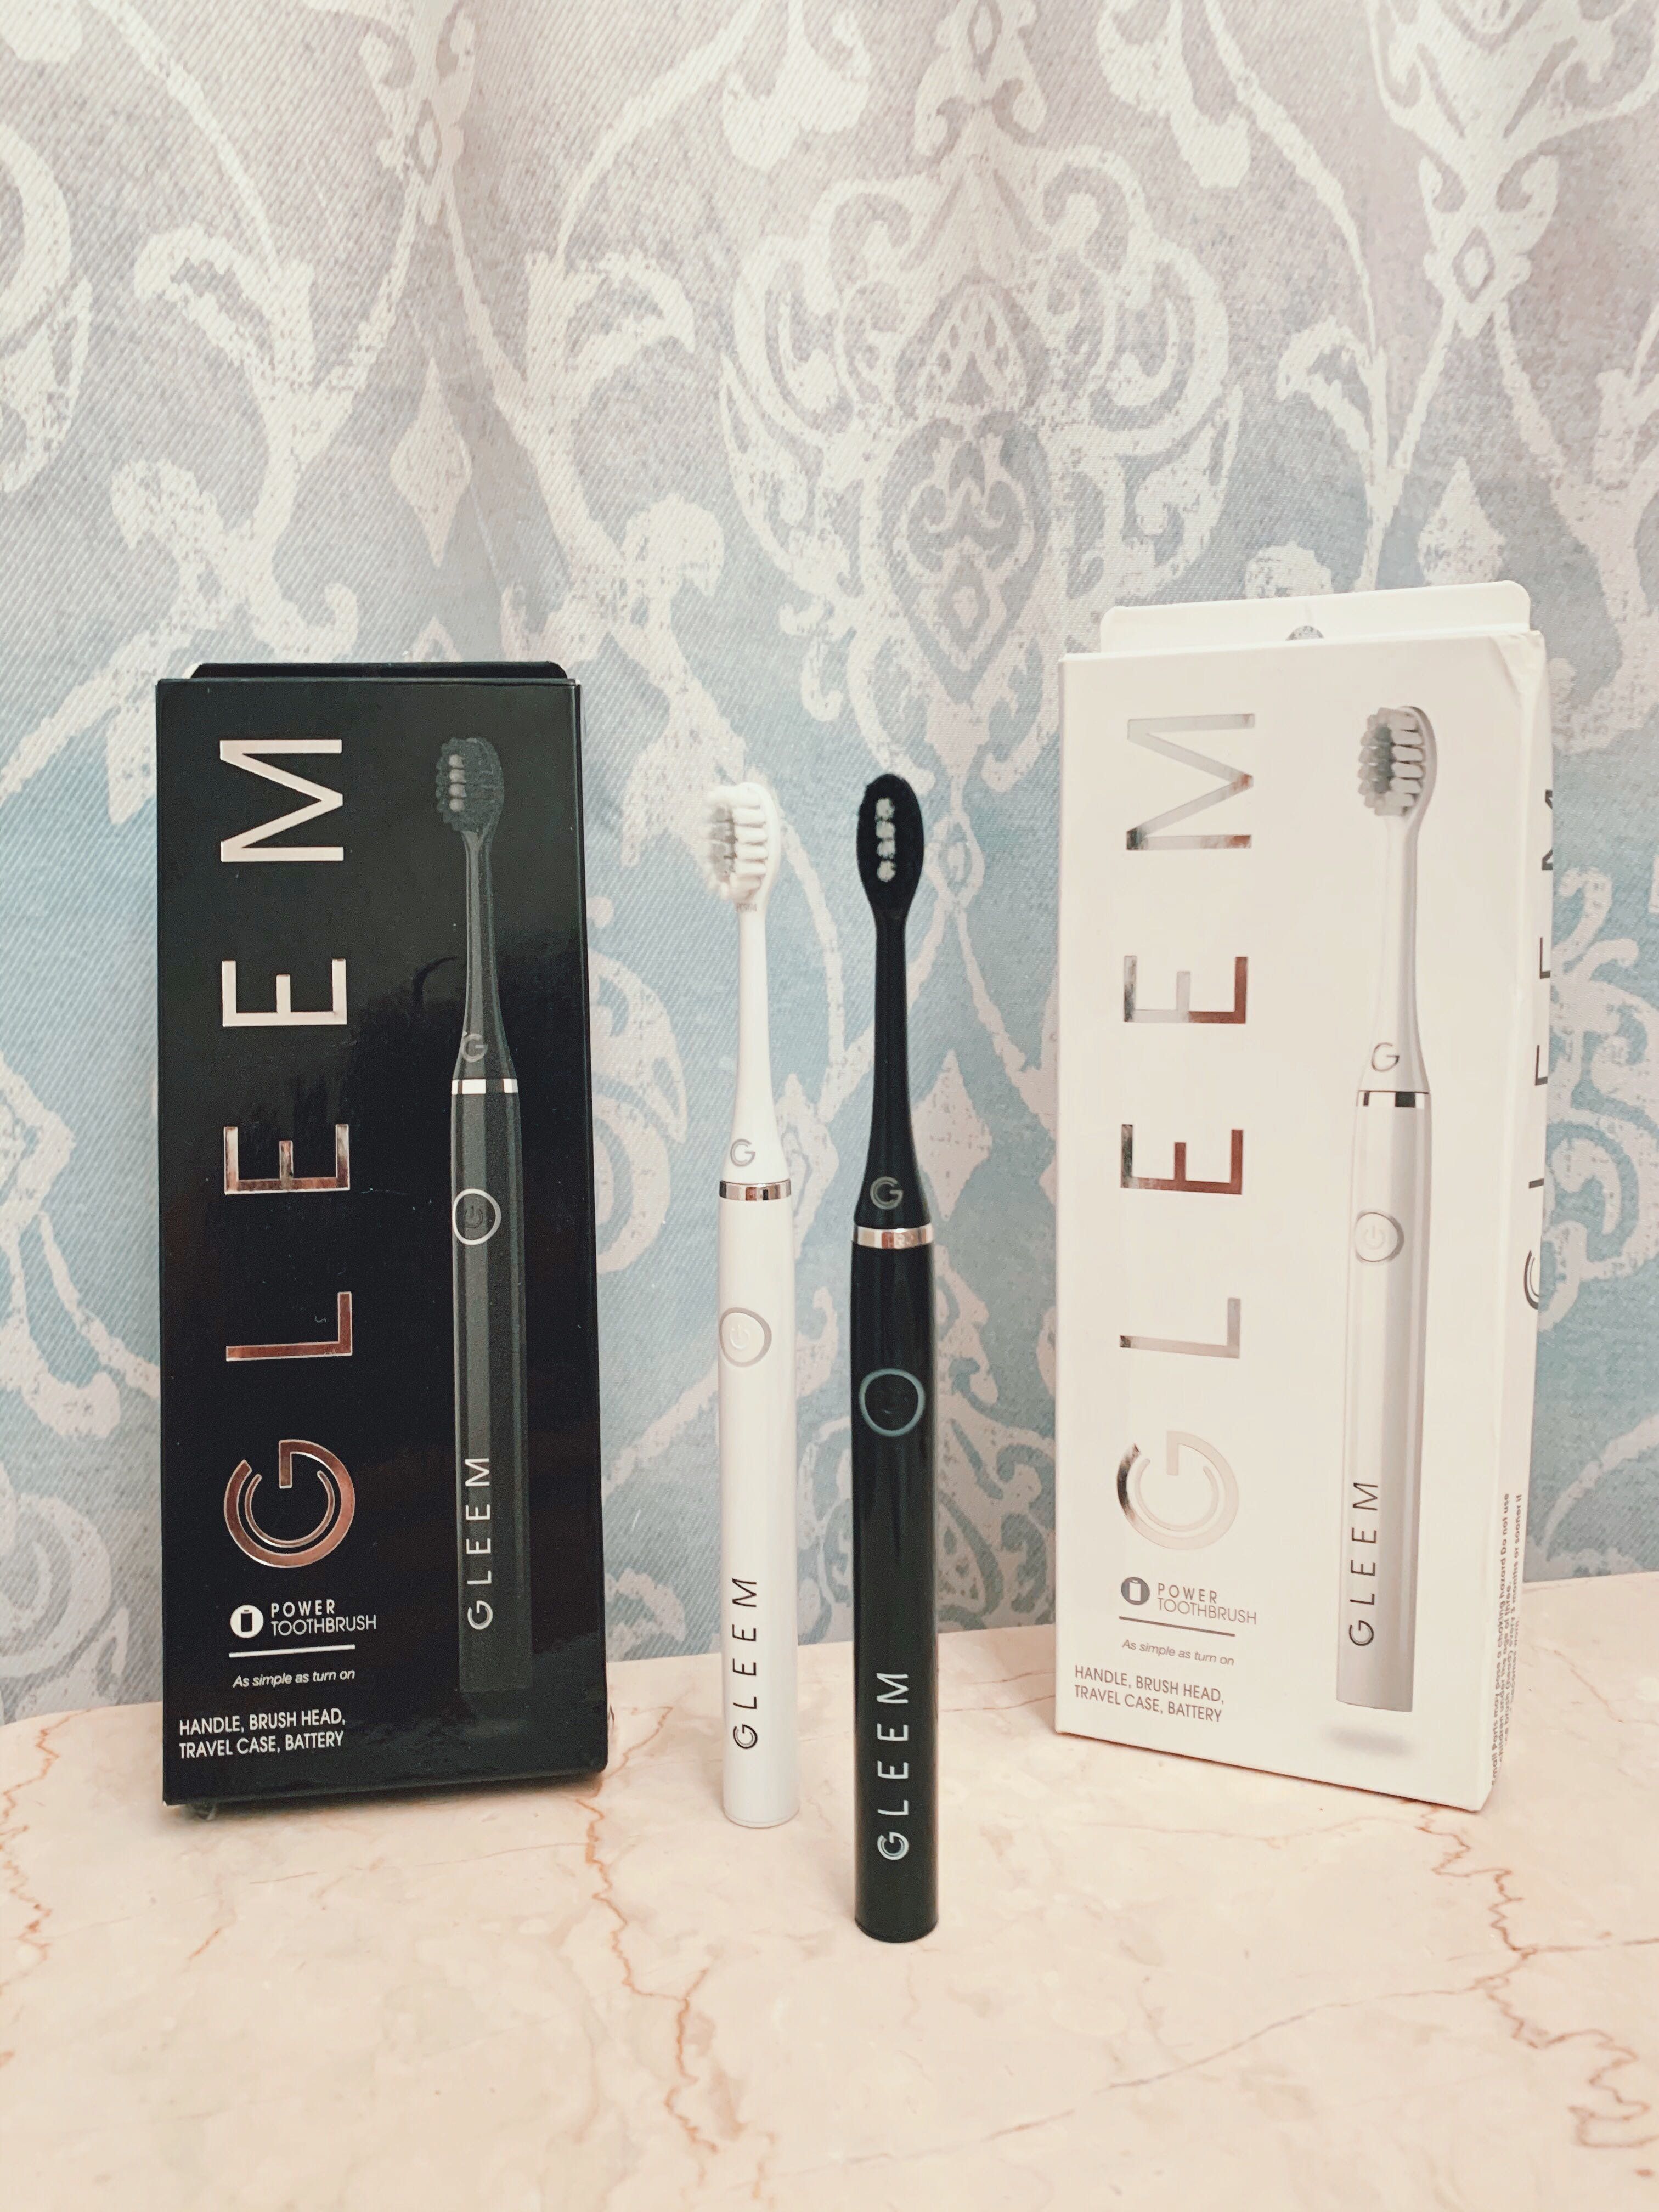 Black gleem electric toothbrush box and toothbrush on marble stone